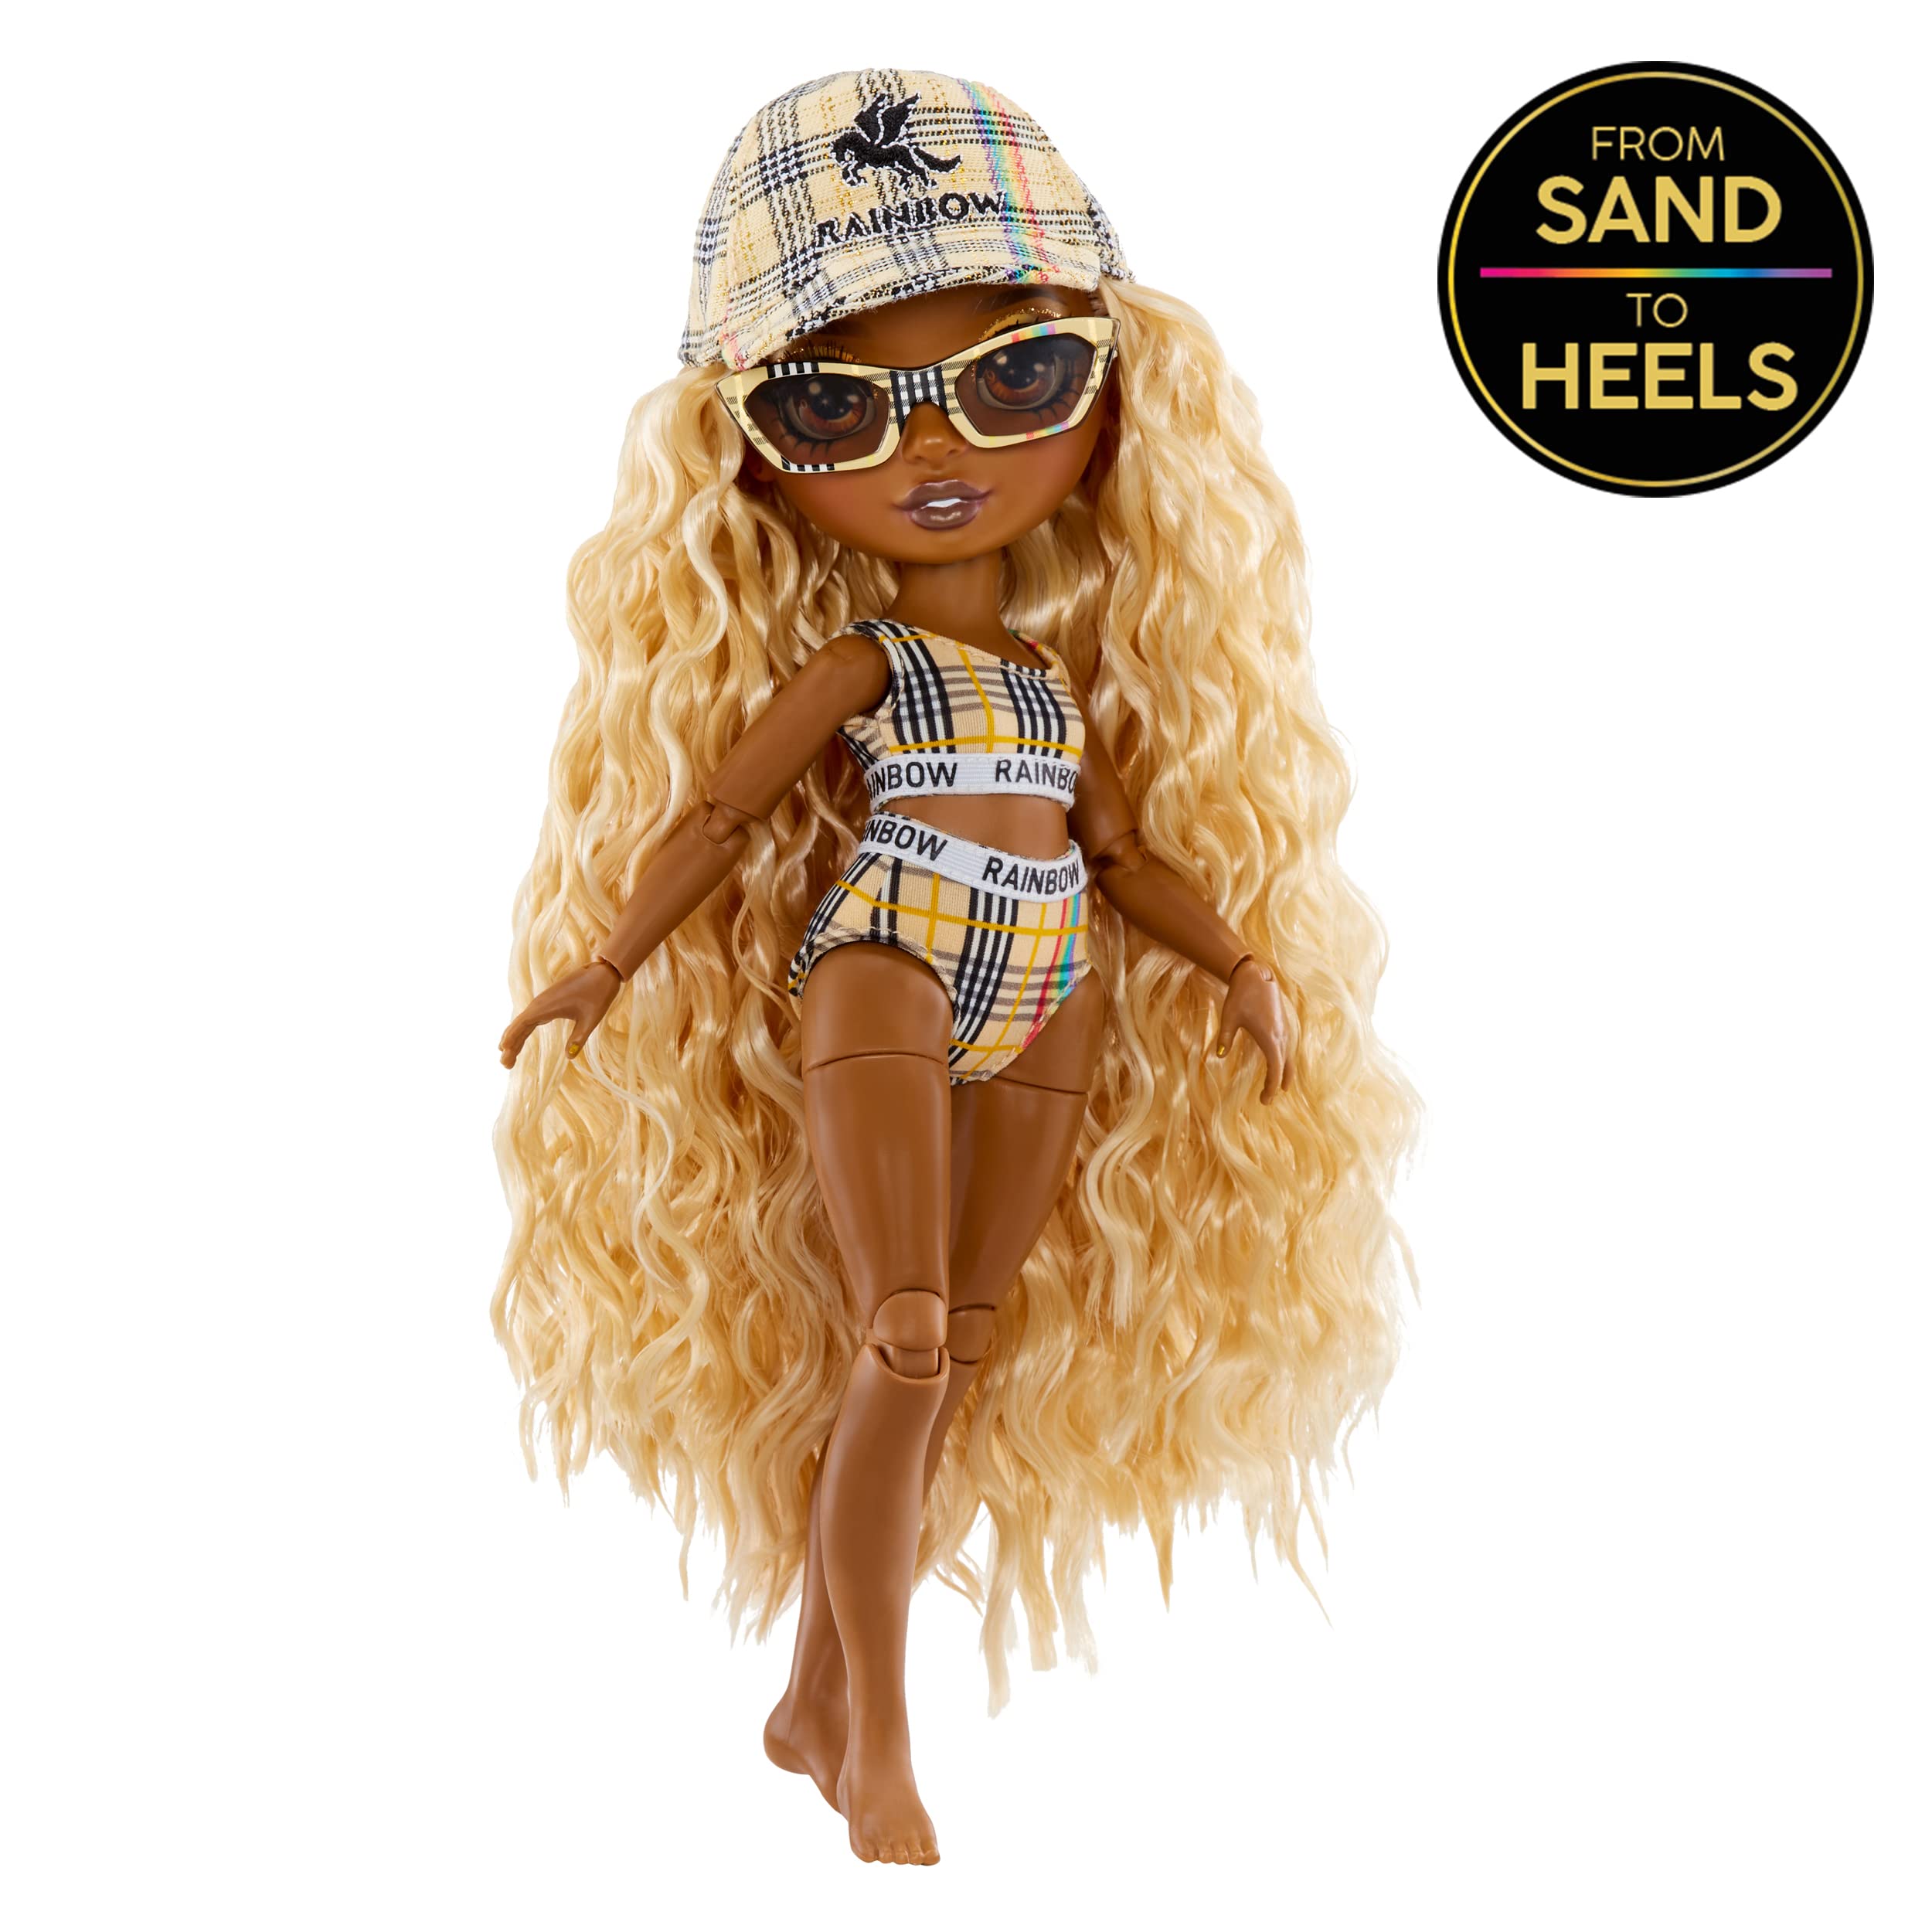 Rainbow High Pacific Coast Harper Dune- Sand (Light Yellow) Fashion Doll with 2 Designer Outfits, Pool Accessories Playset, Interchangeable Legs, Toys for Kids, Great Gift for Ages 6-12+ Years